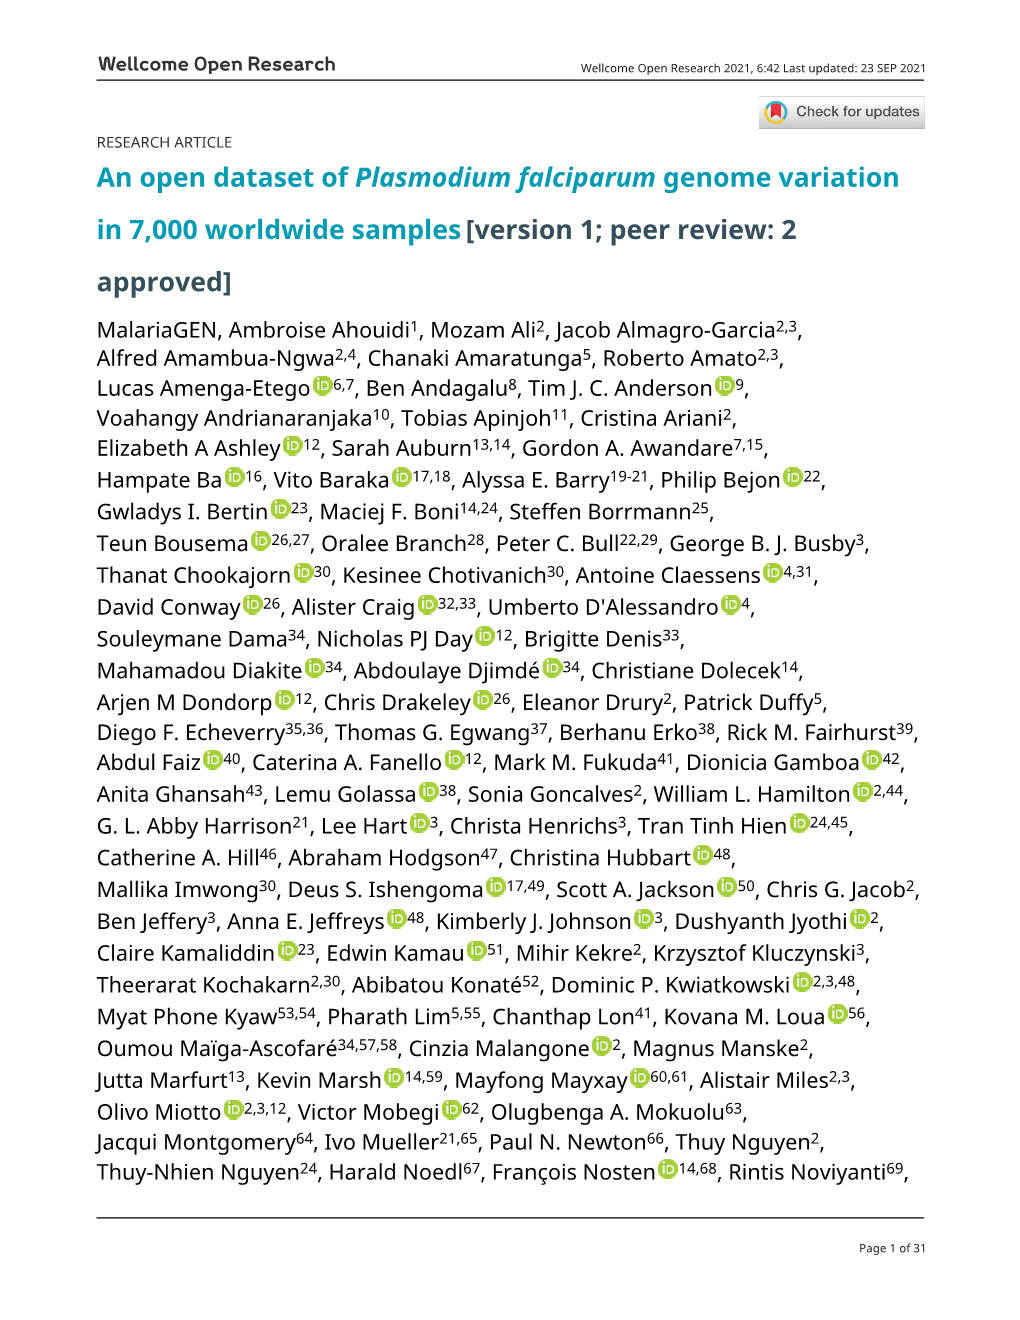 An Open Dataset of Plasmodium Falciparum Genome Variation in 7,000 Worldwide Samples[Version 1; Peer Review: 2 Approved]